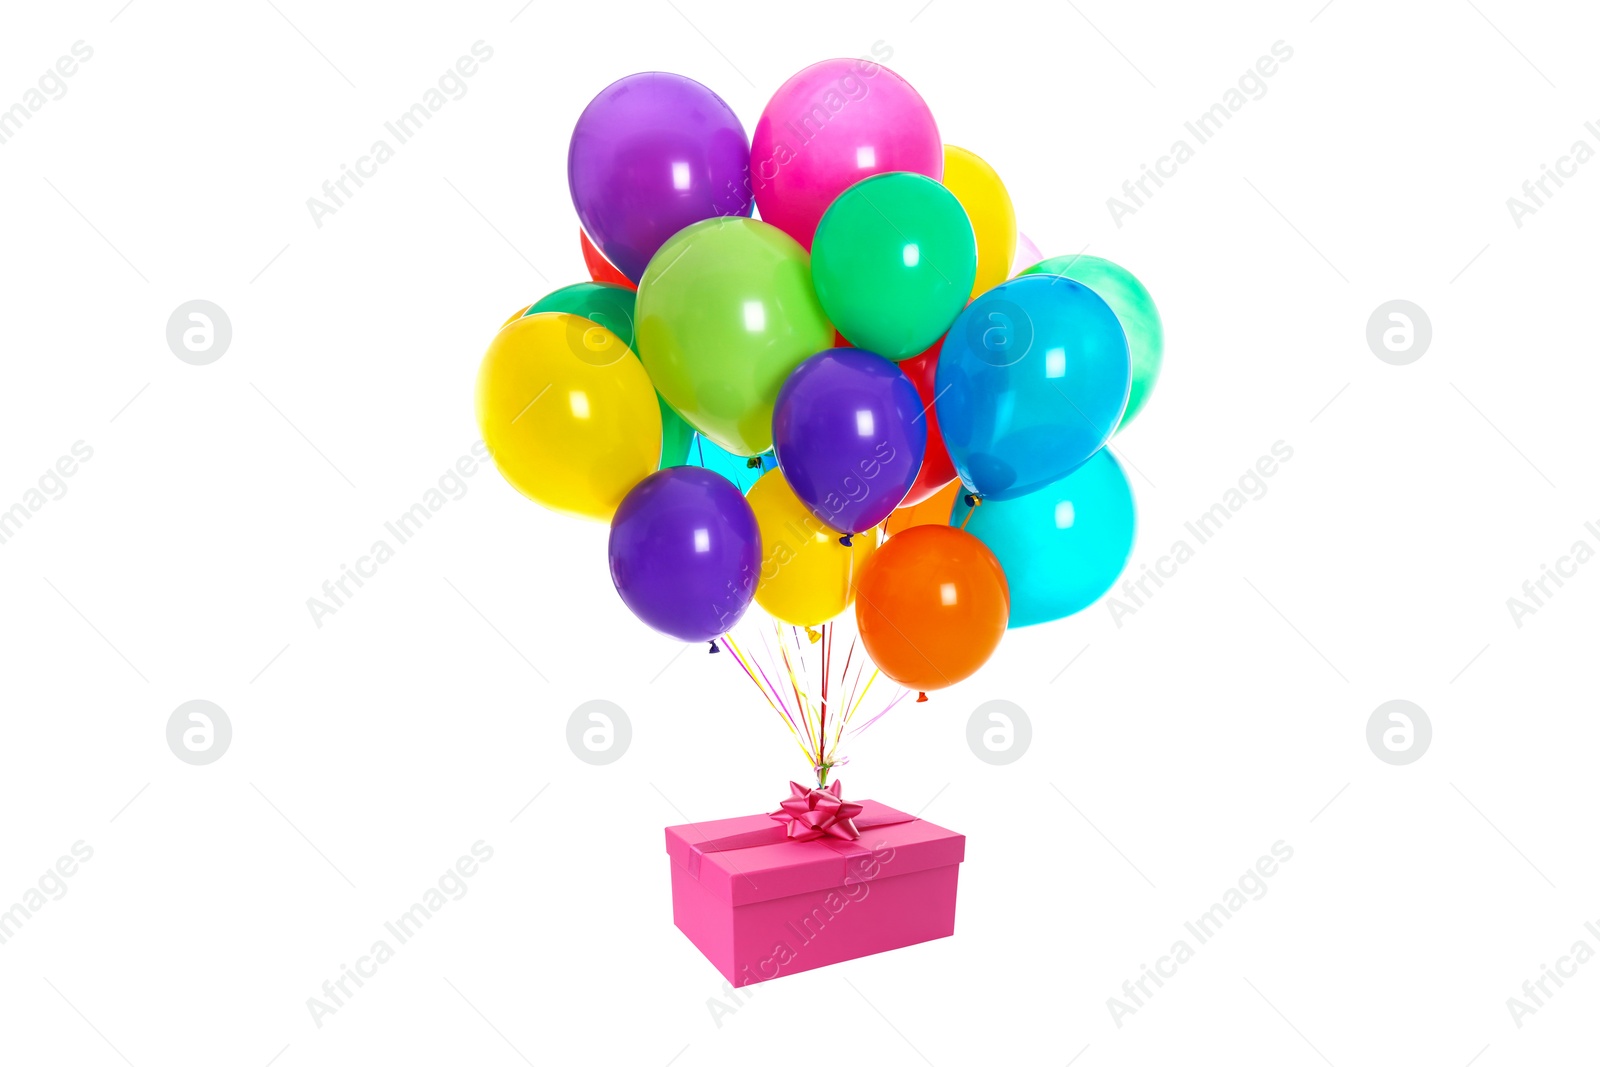 Image of Many balloons tied to pink gift box on white background